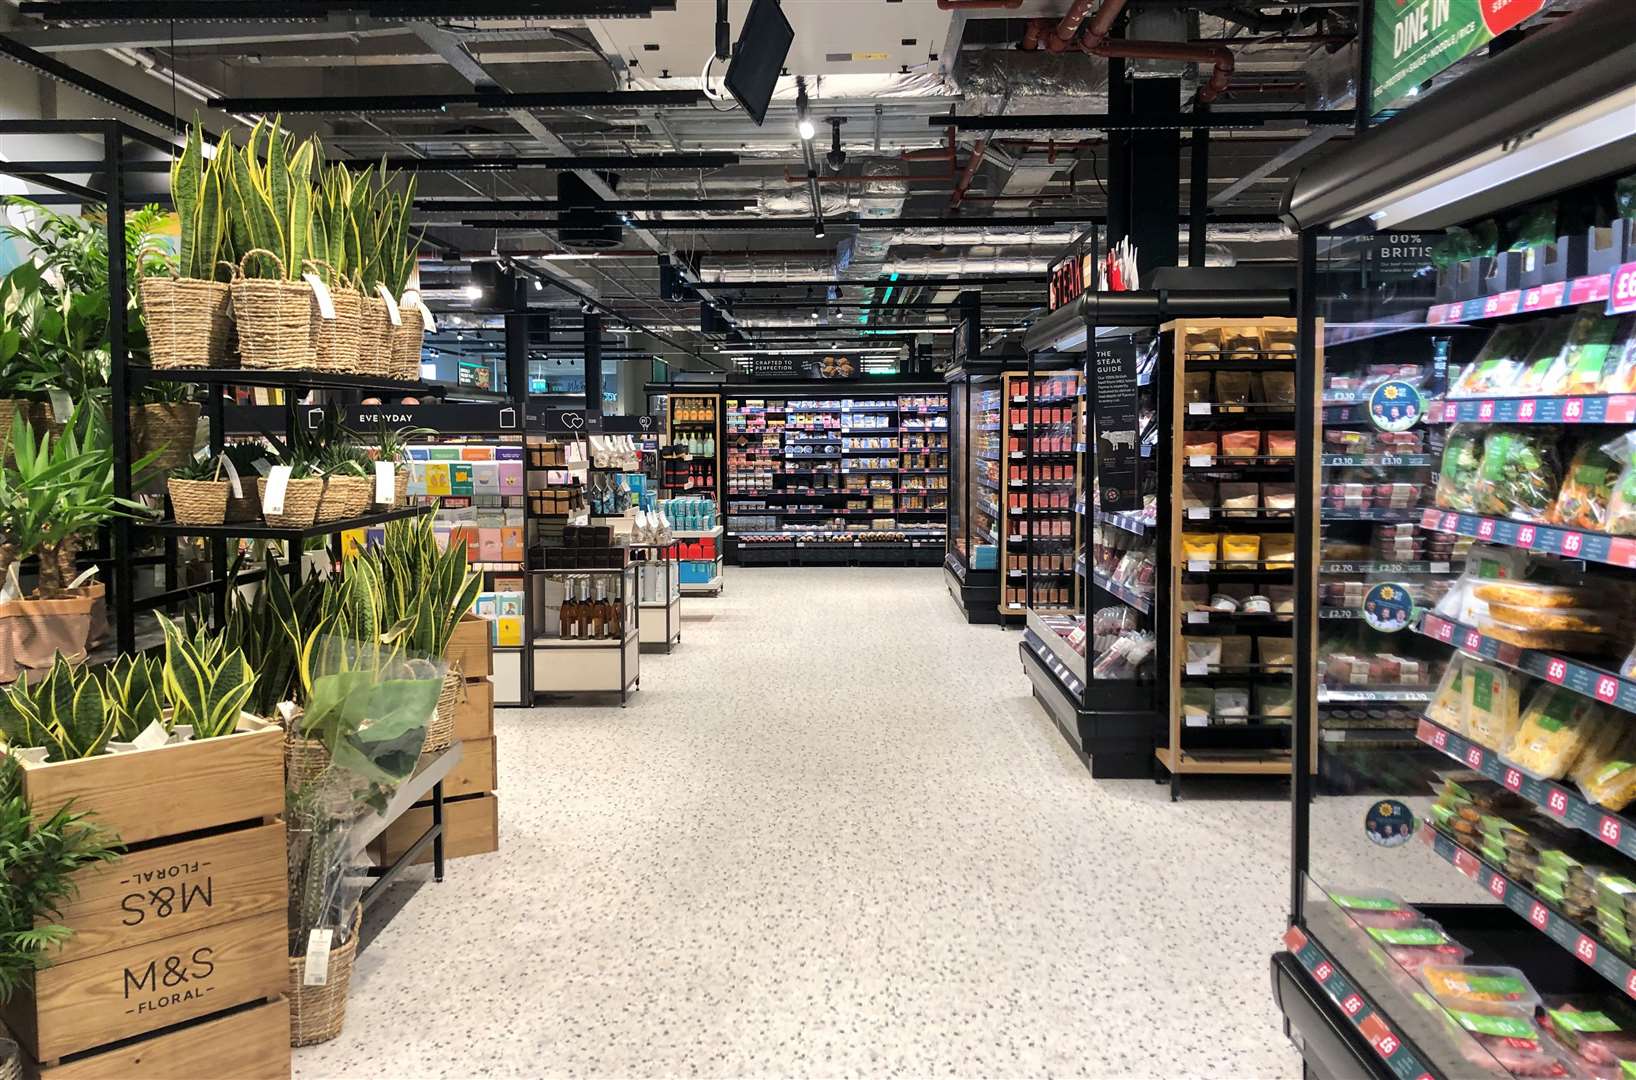 Interior shot of the M&S at Bluewater